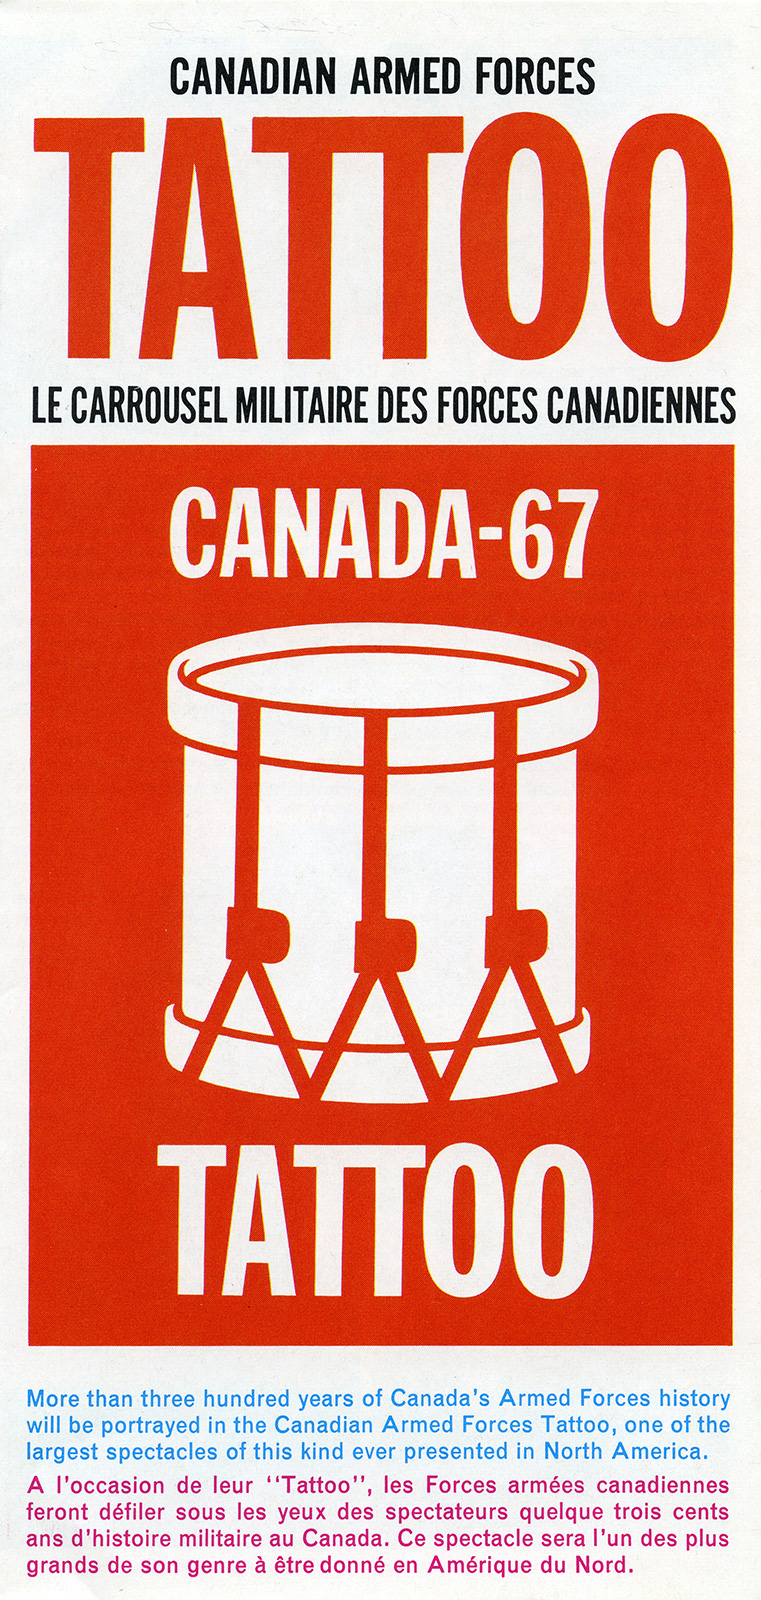 The cover of a brochure about the Canadian Armed Forces Tattoo.